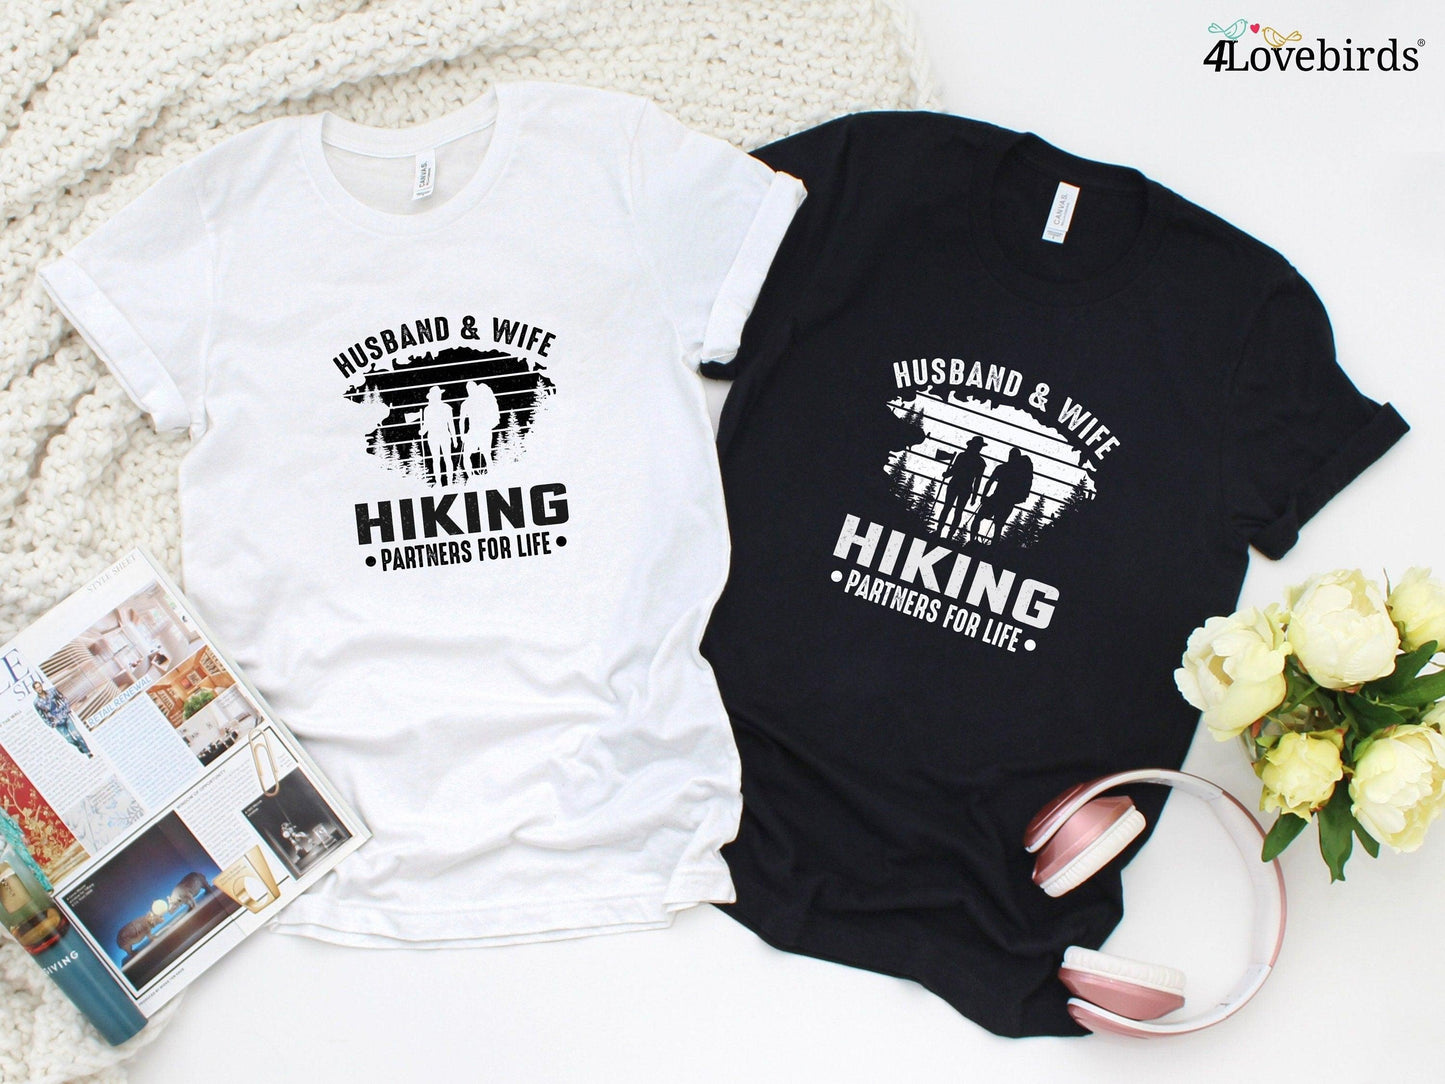 Husband & Wife hiking partners for life Hoodie, Lovers T-shirt, Gift for Couples, Valentine Sweatshirt, Cute shirt, adventurer couple - 4Lovebirds